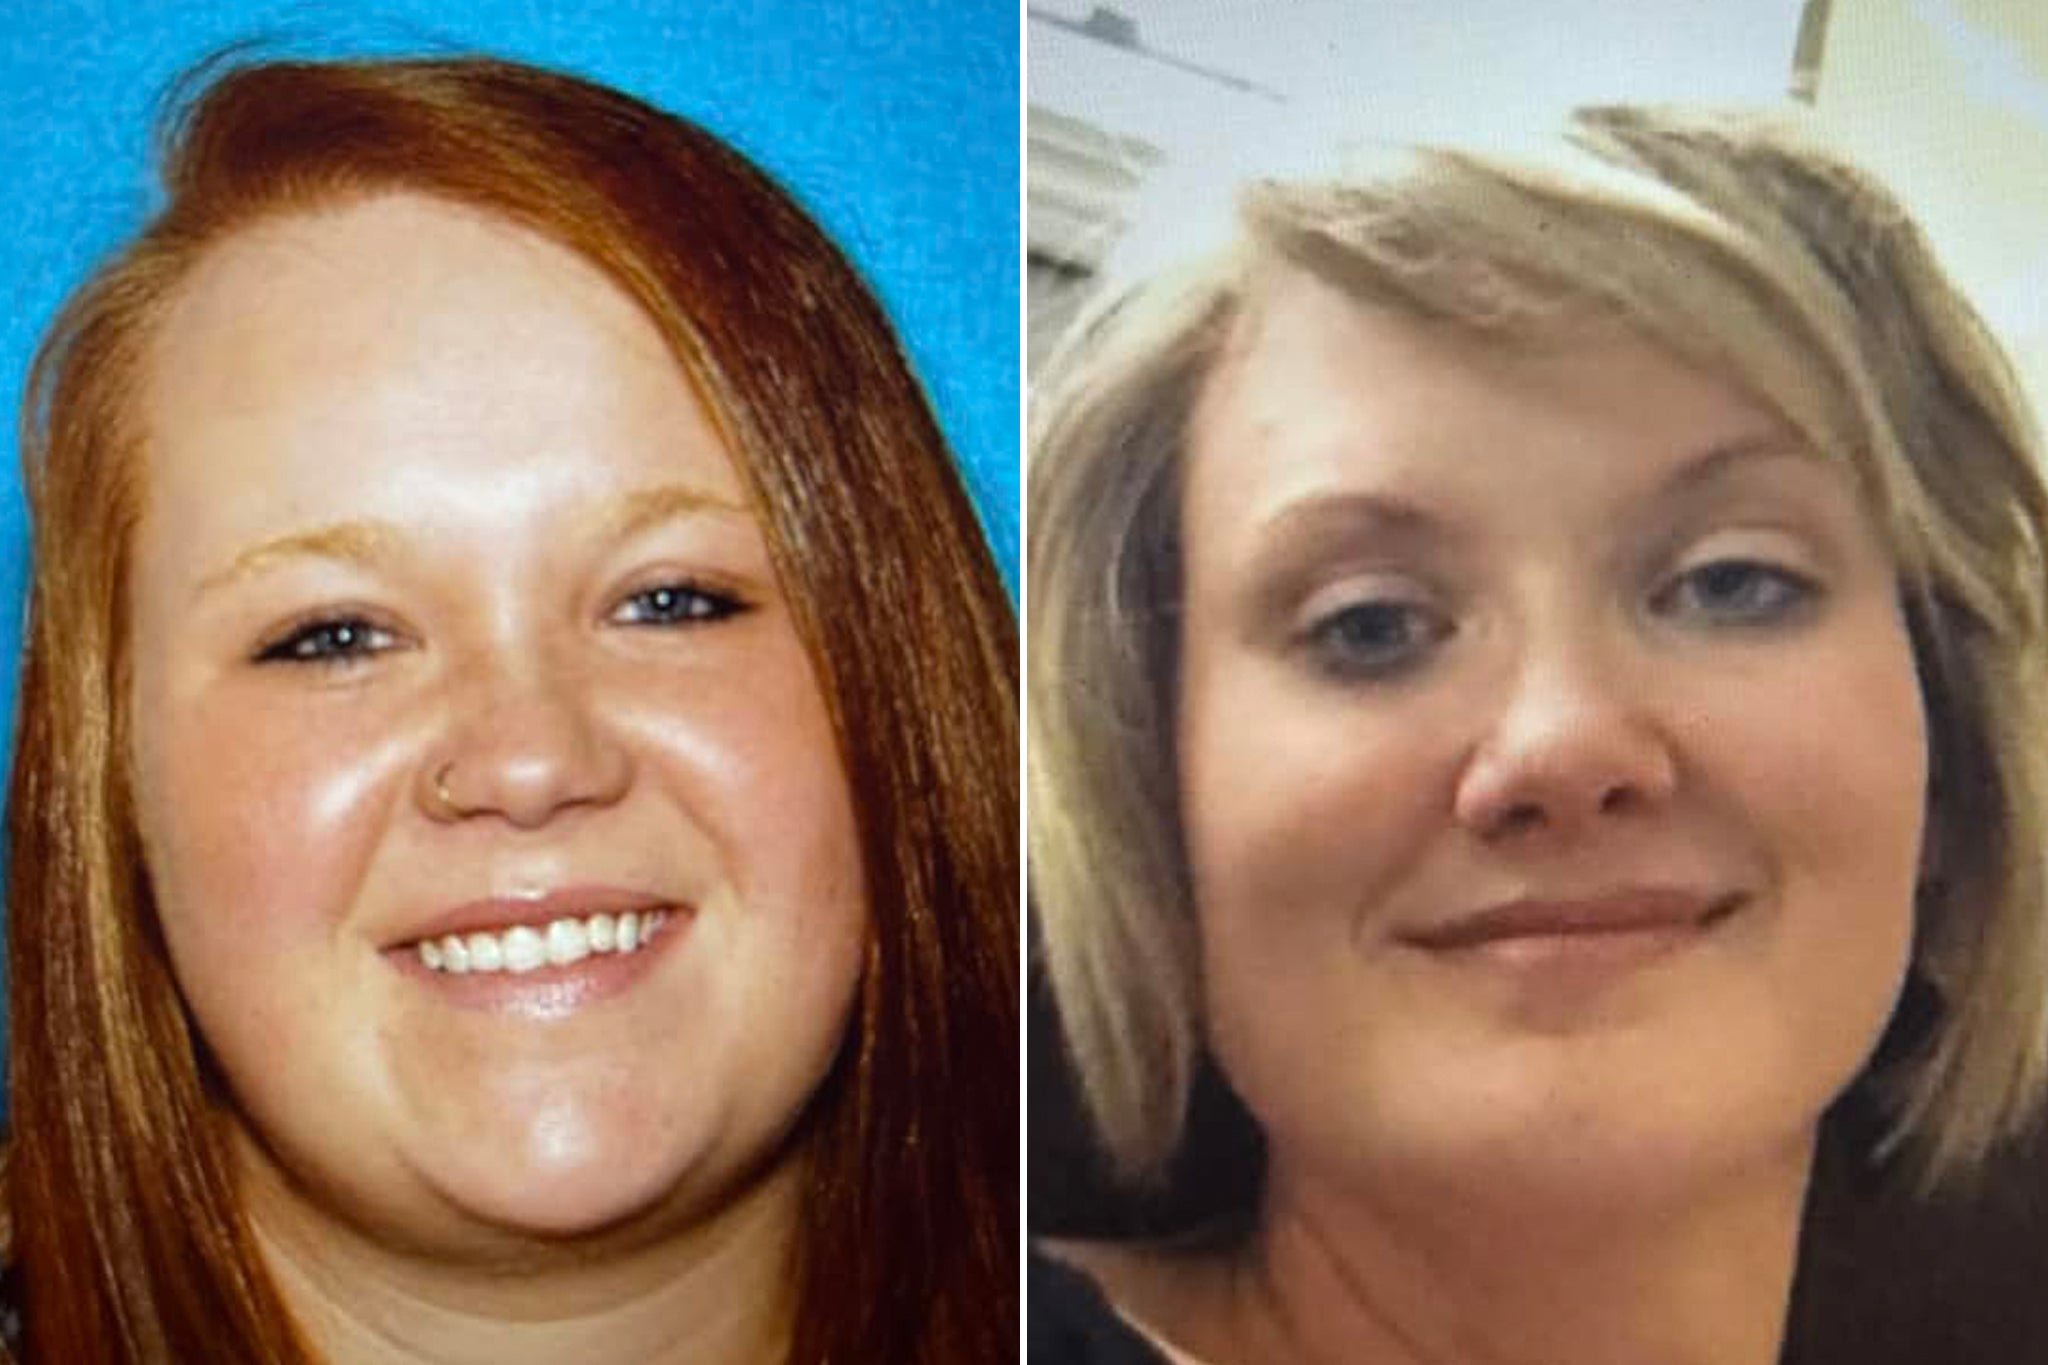 Veronica Butler, 27, and Jilian Kelley, 39, were on their way to pick up children when they disappeared